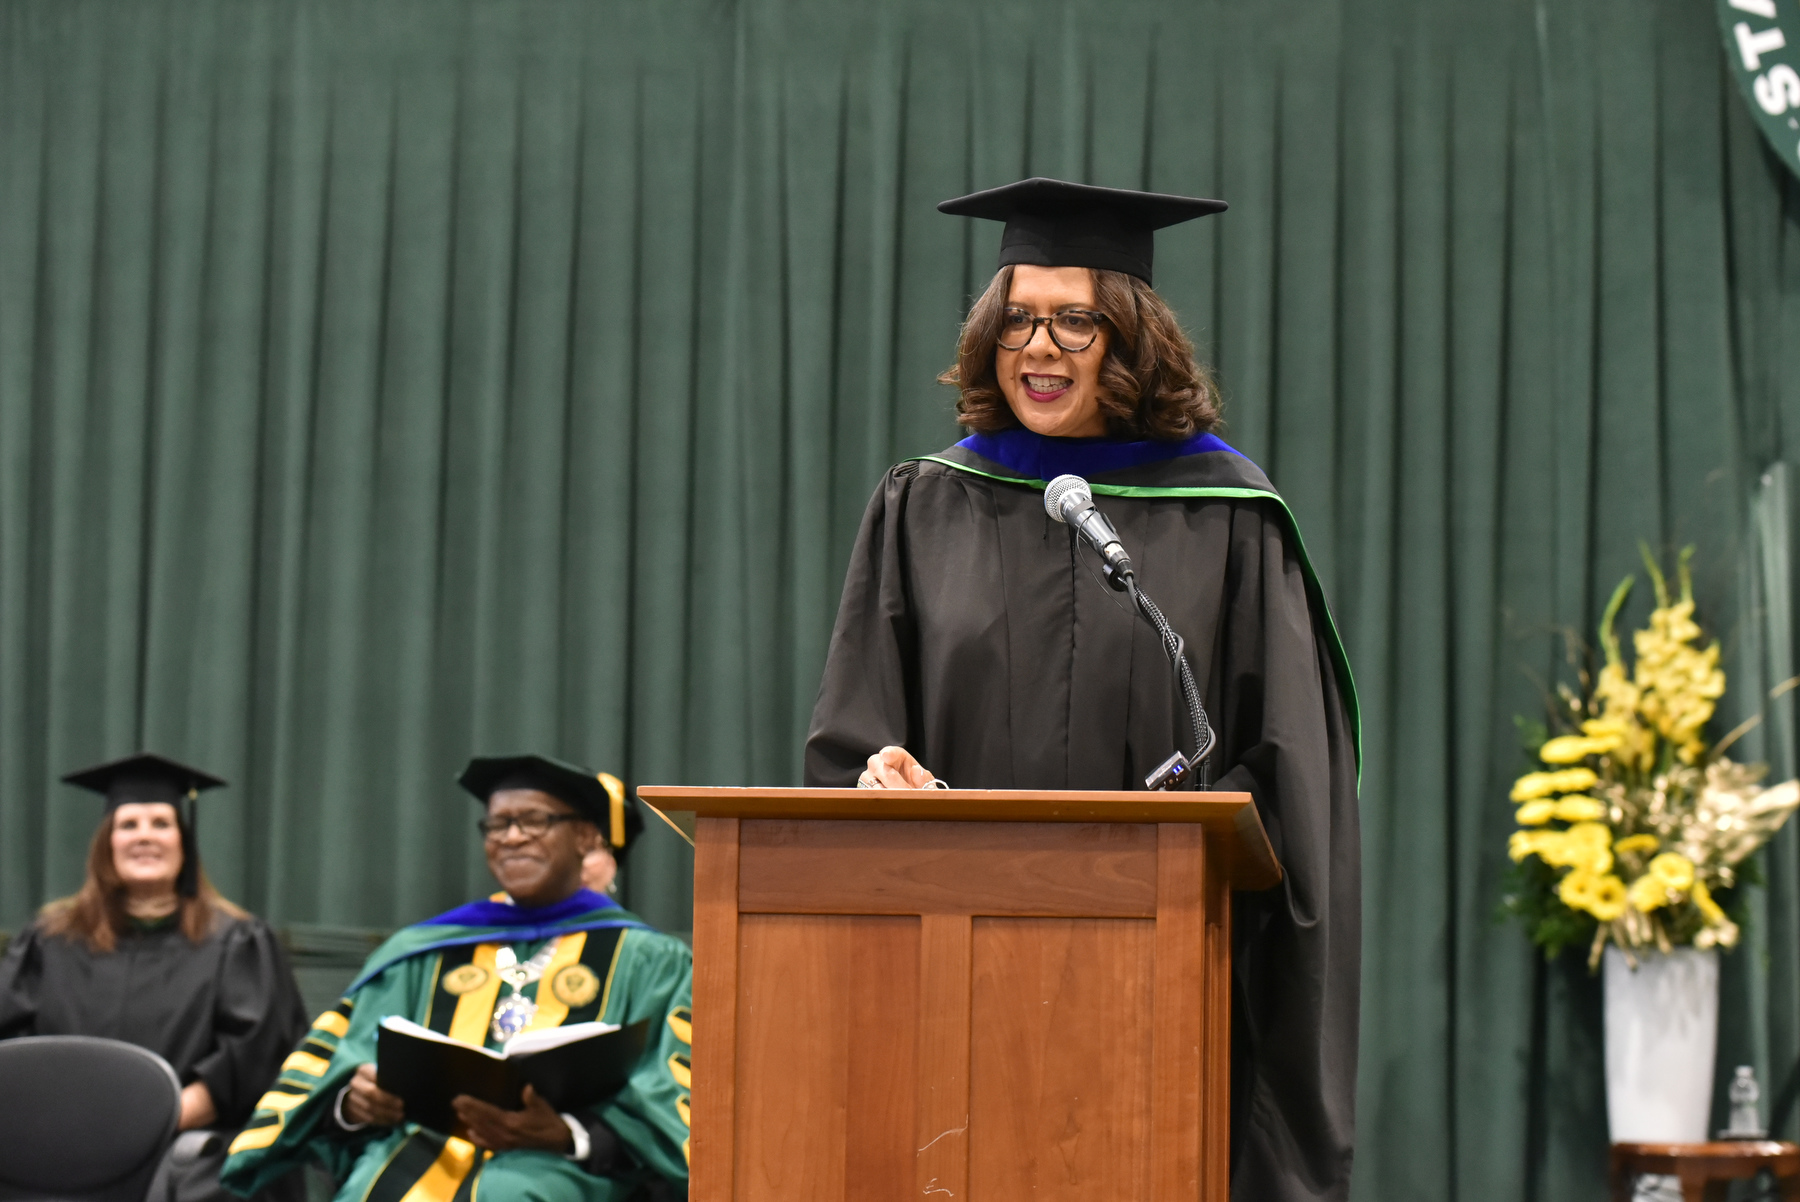 Trudy Perkins ’93, retired chief of staff and communications director for U.S. Sen. Sherrod Brown, received an honorary doctorate in humane letters from SUNY for outstanding public service, and served as Commencement speaker for the 9 a.m. ceremony for the College of Liberal Arts and Sciences.